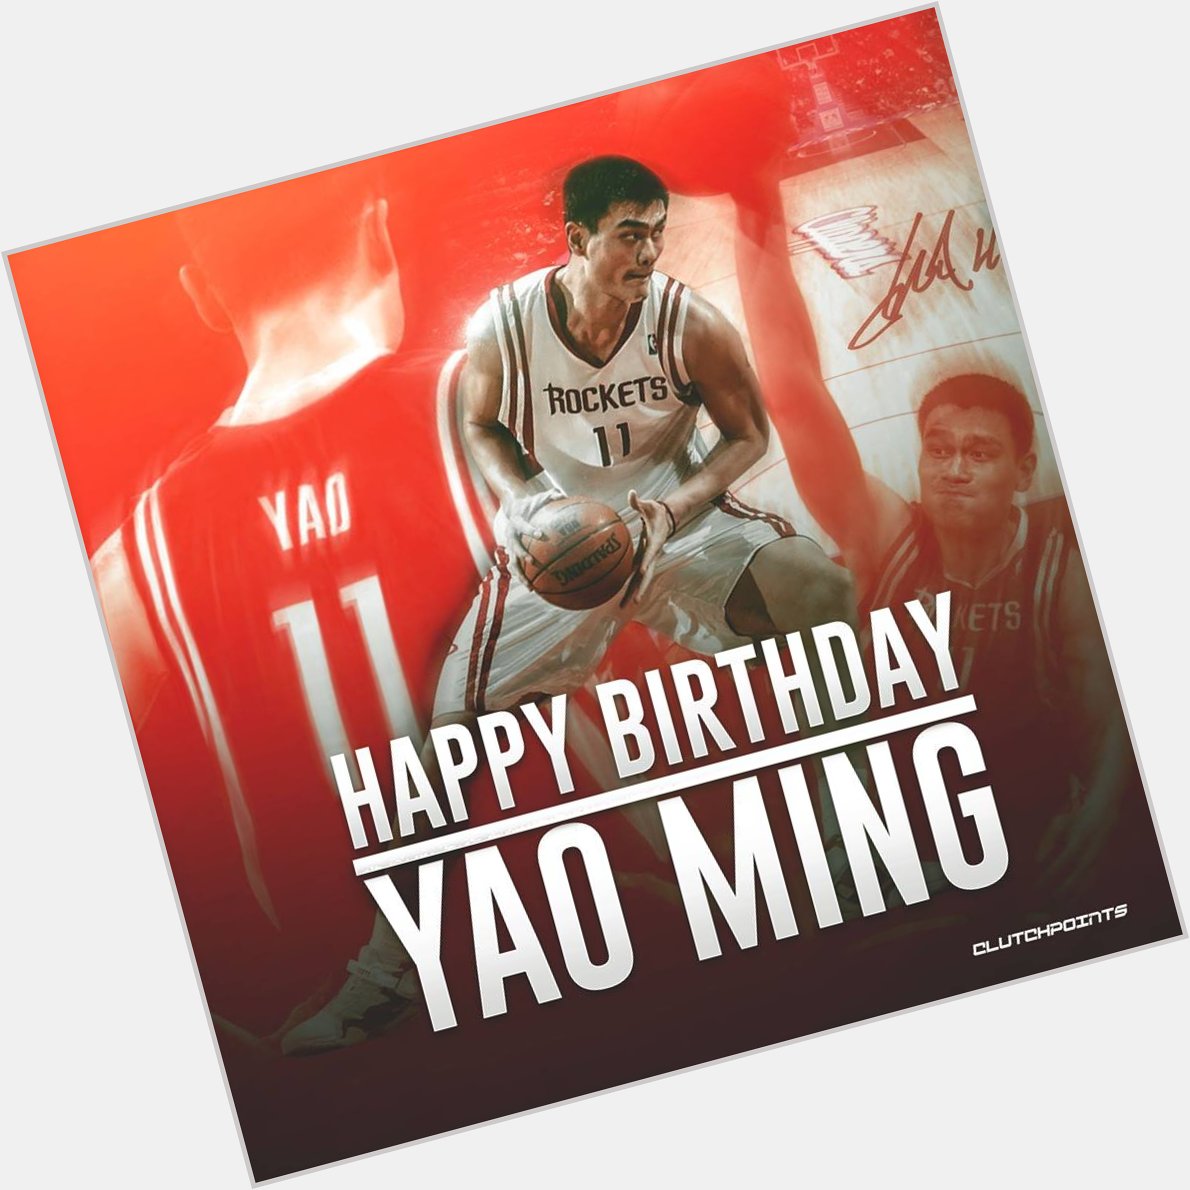 Happy 38th birthday to one of the most influential players in the history of the NBA, the great Yao Ming  